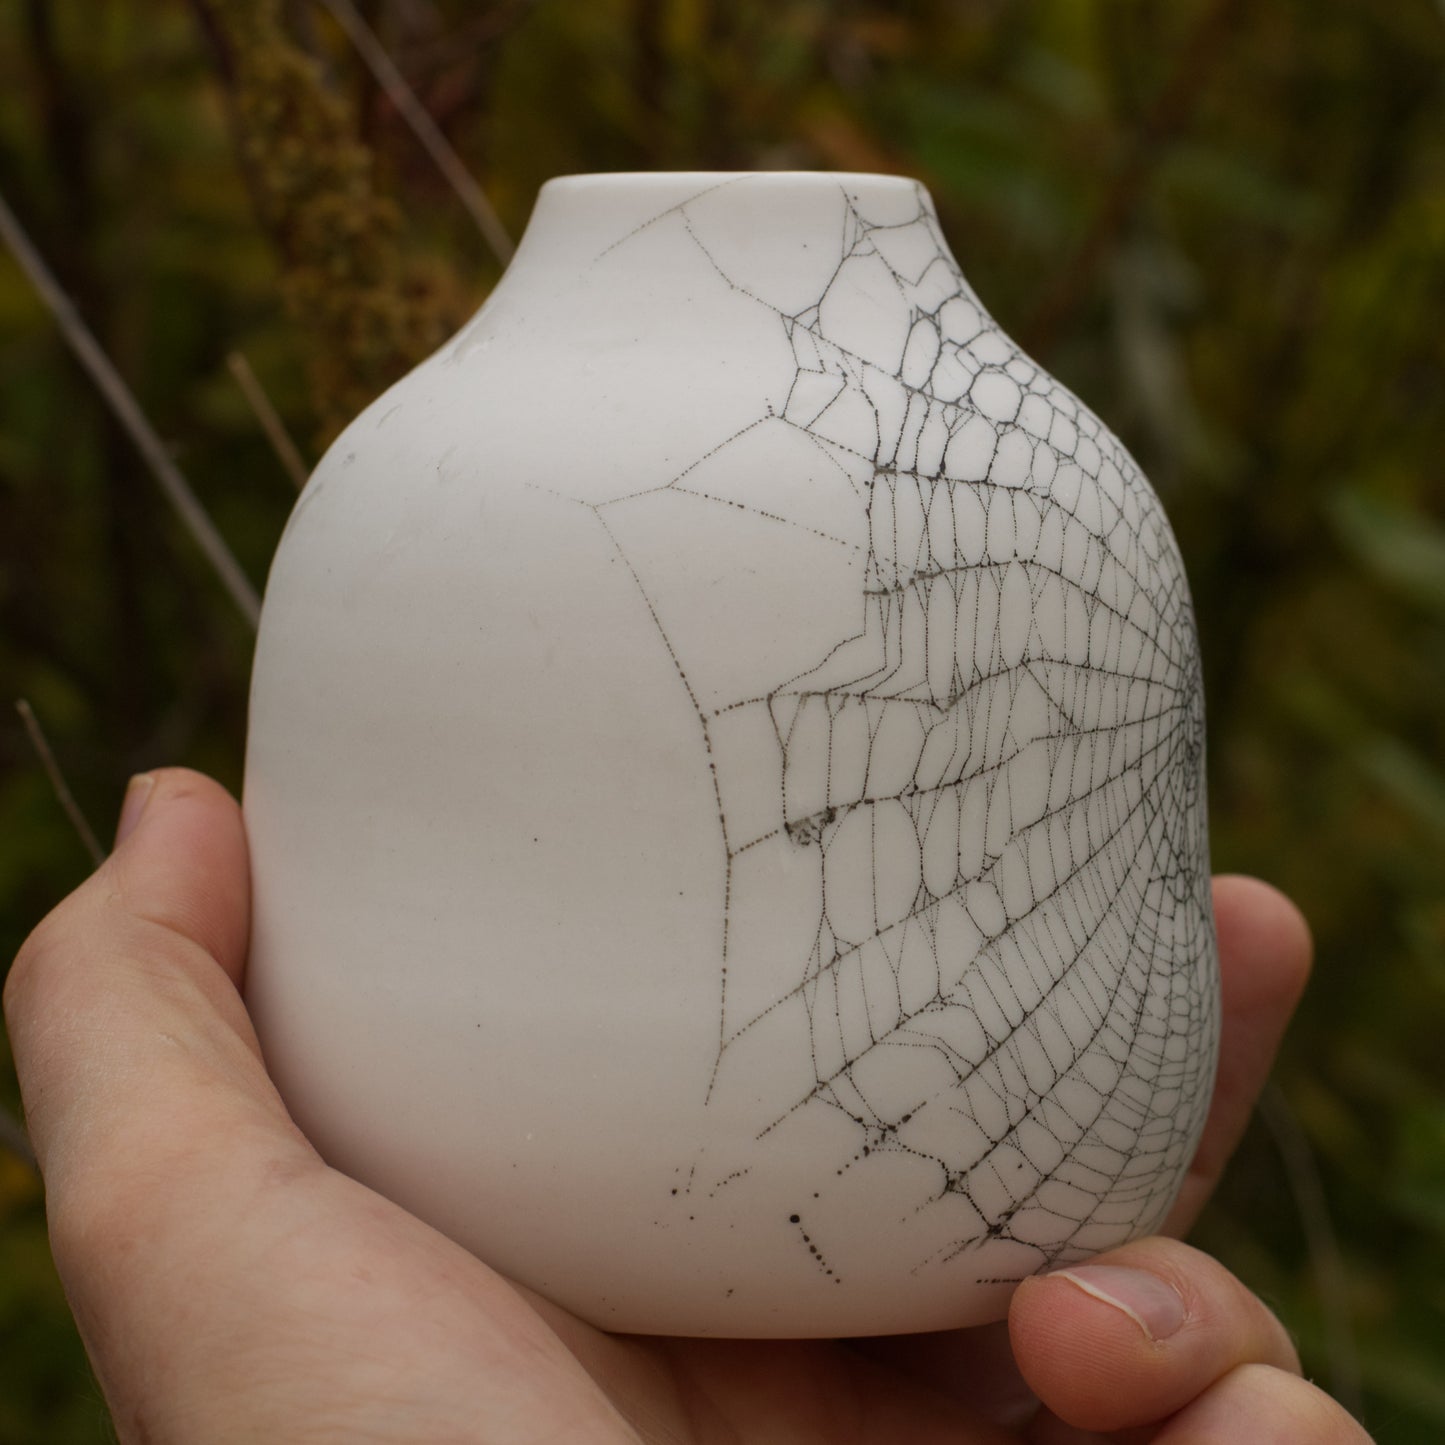 Web on Clay (053), Collected August 25, 2022